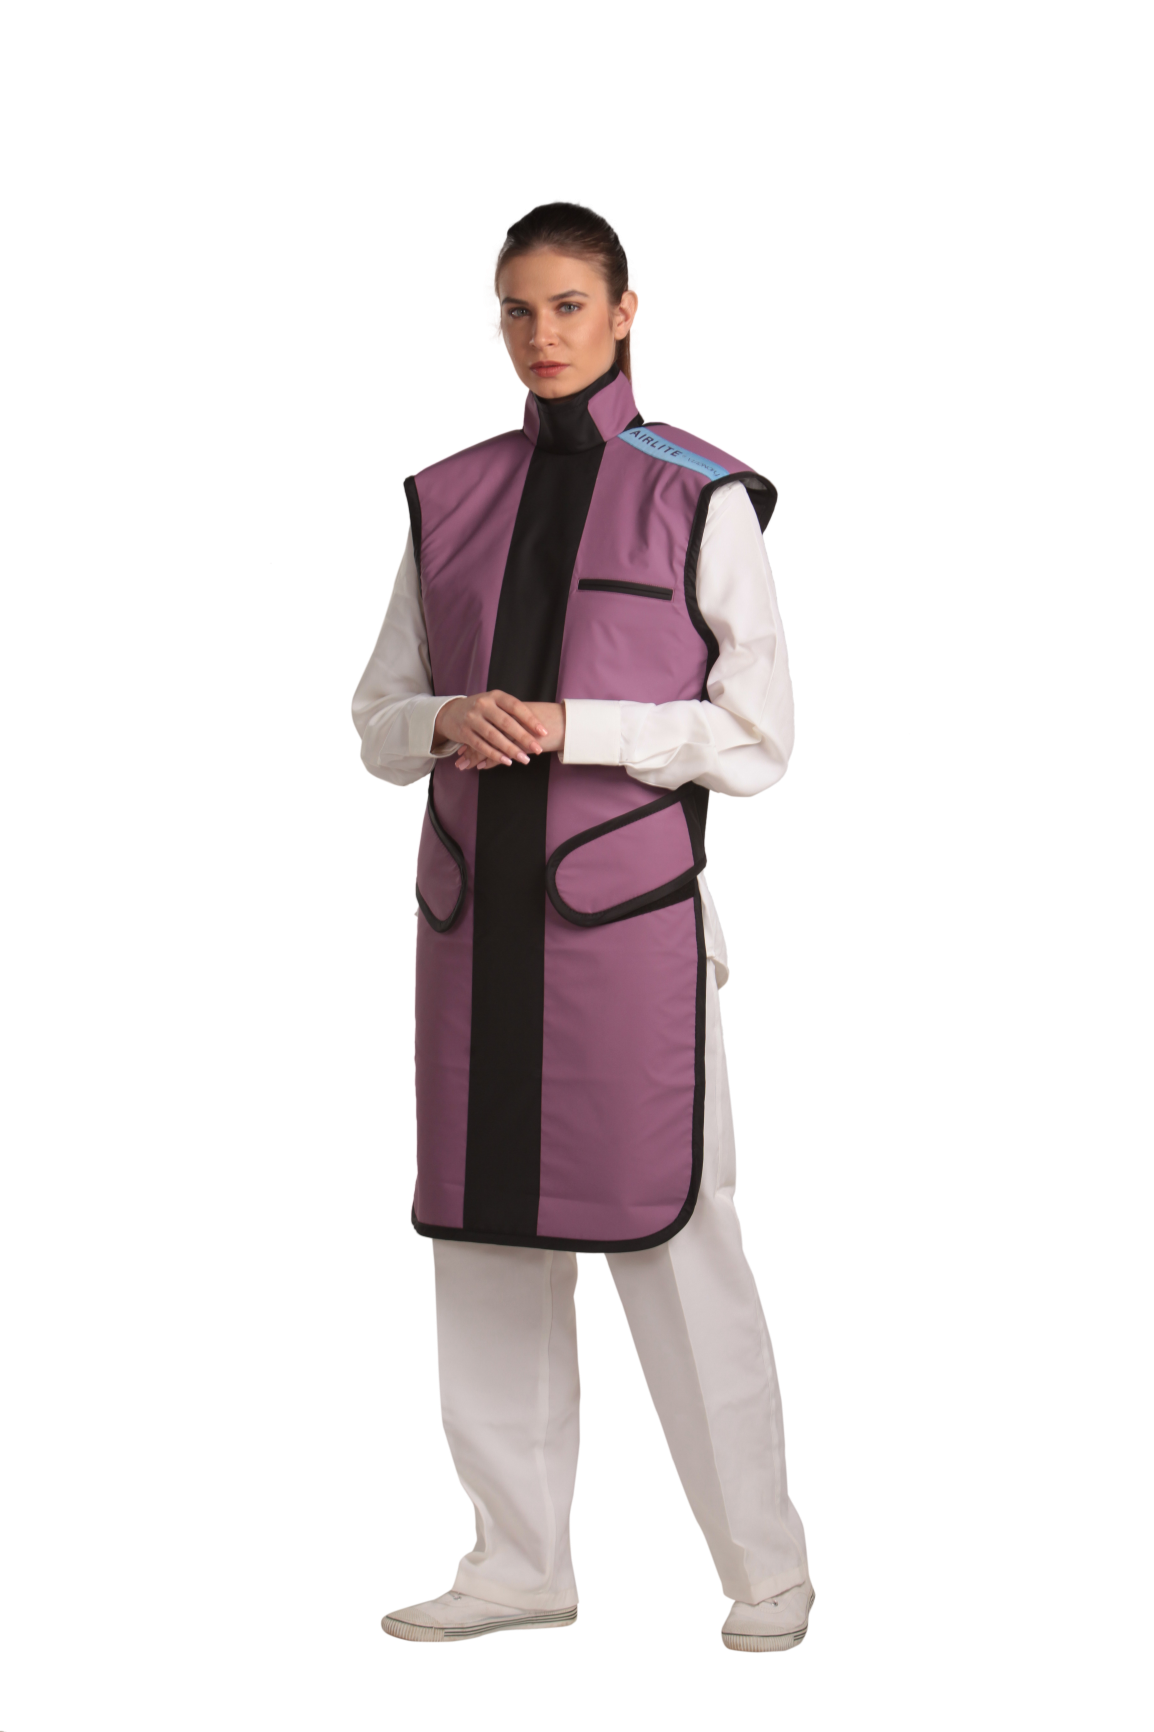 A left-side frontal view of a female model, her two hands clasped together below her chest, wearing a coat apron with an integrated thyroid guard. The apron is mauve in color with a Jet black center line and has closed velcro fasteners by the sides.